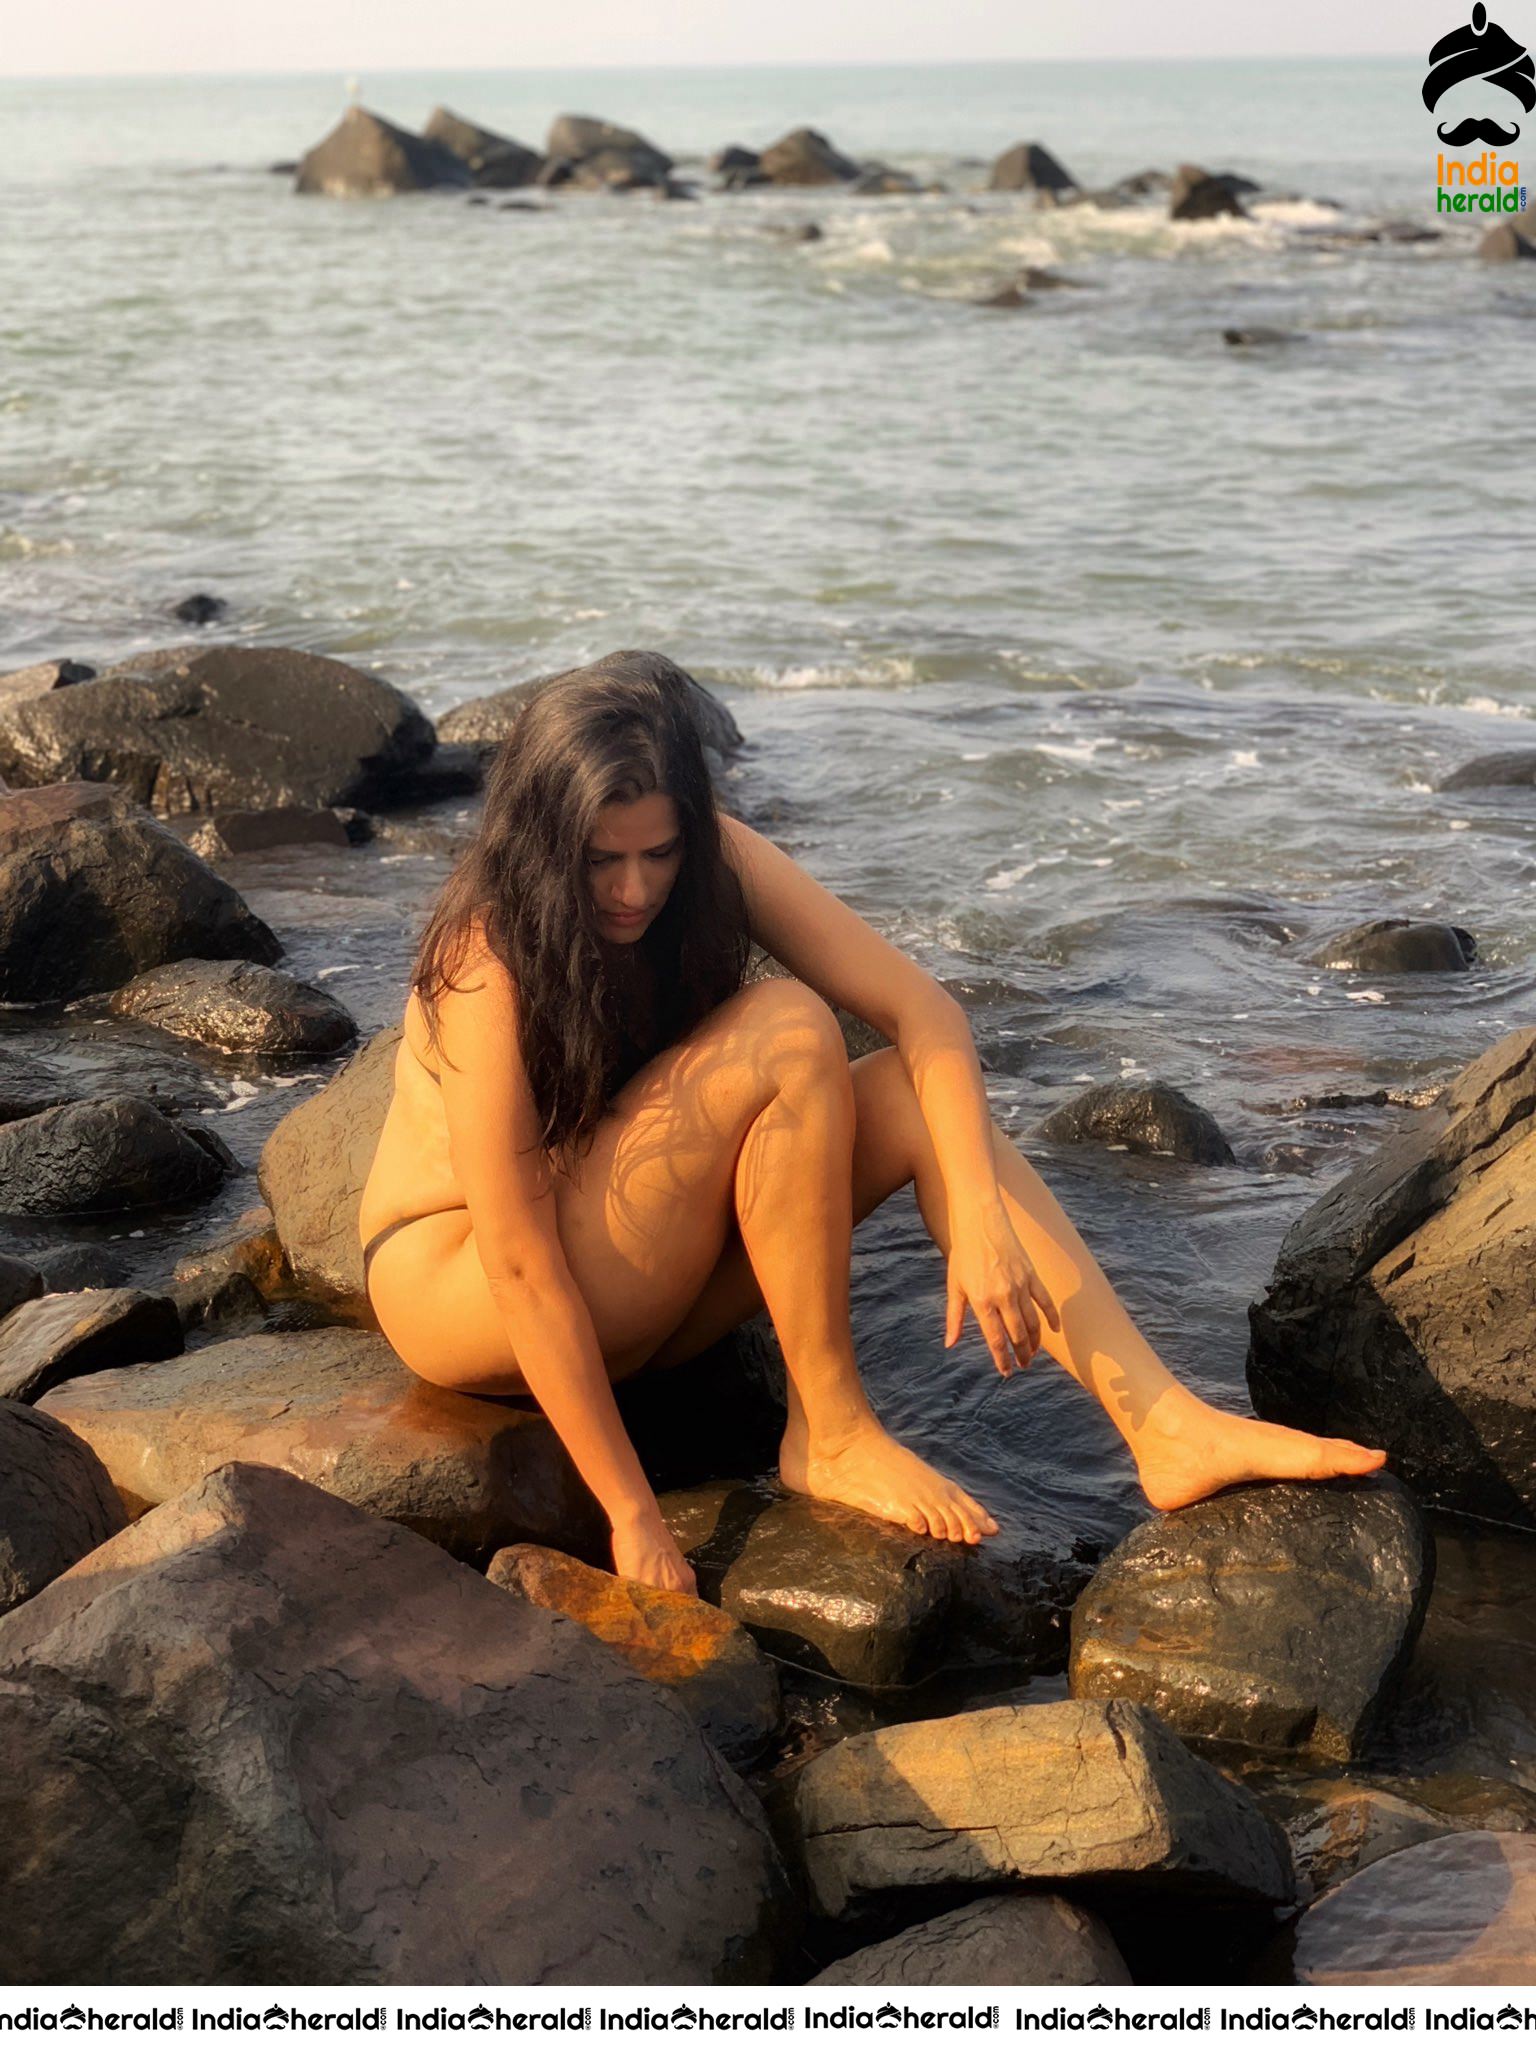 Sona Mohapatra Sizzles In Bikini And Sexposes On The Beach Set 2